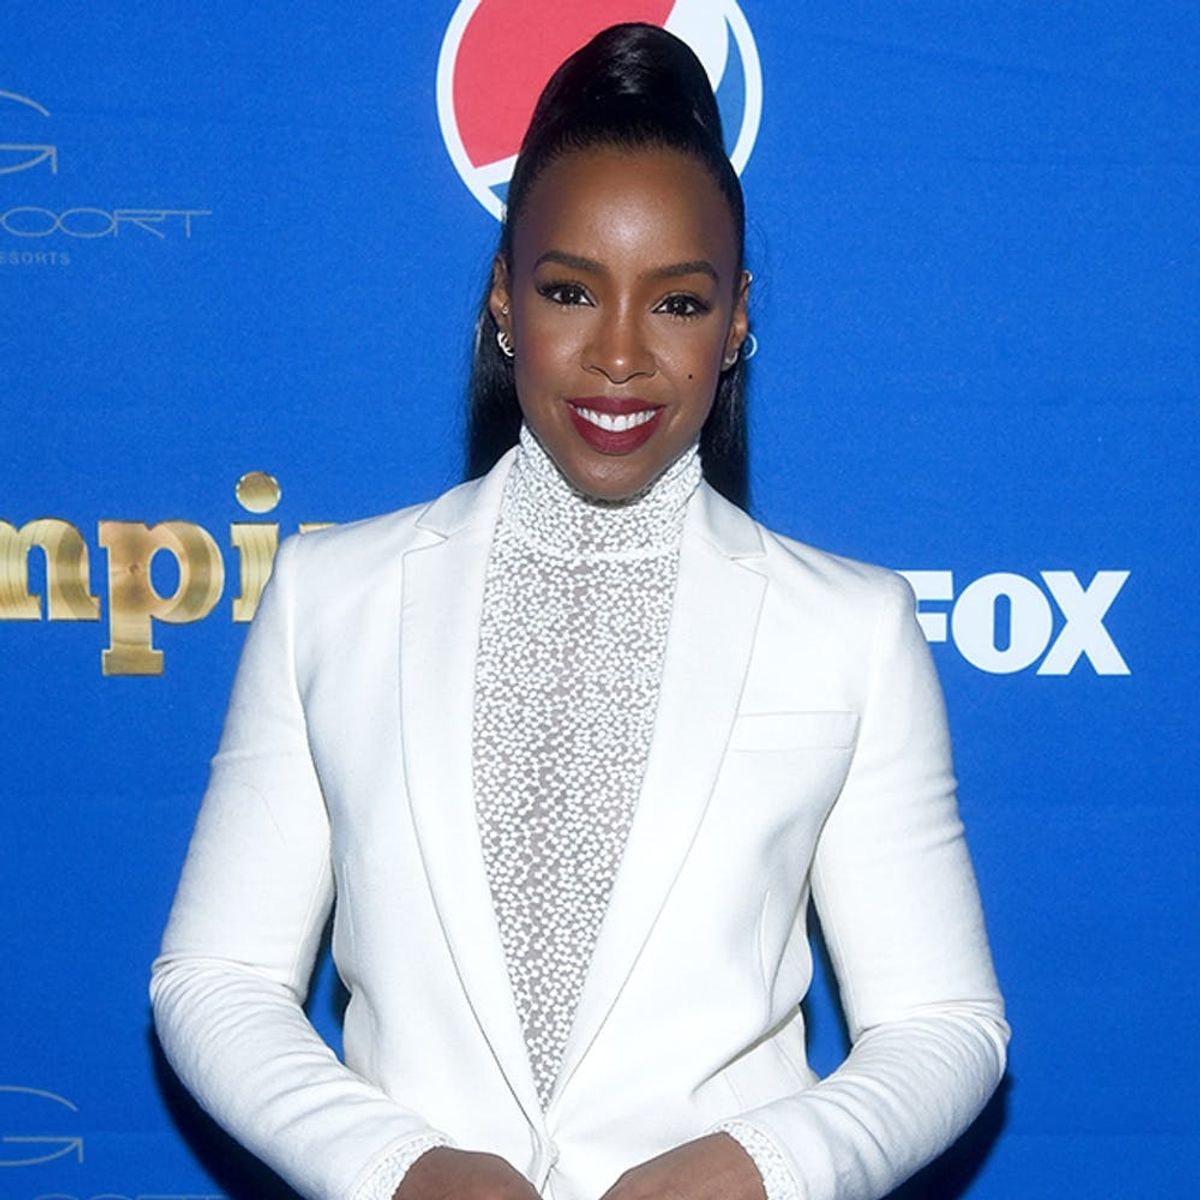 Kelly Rowland Shares What Christmas Looks like With a 1-Year-Old + What’s on HER Wish List